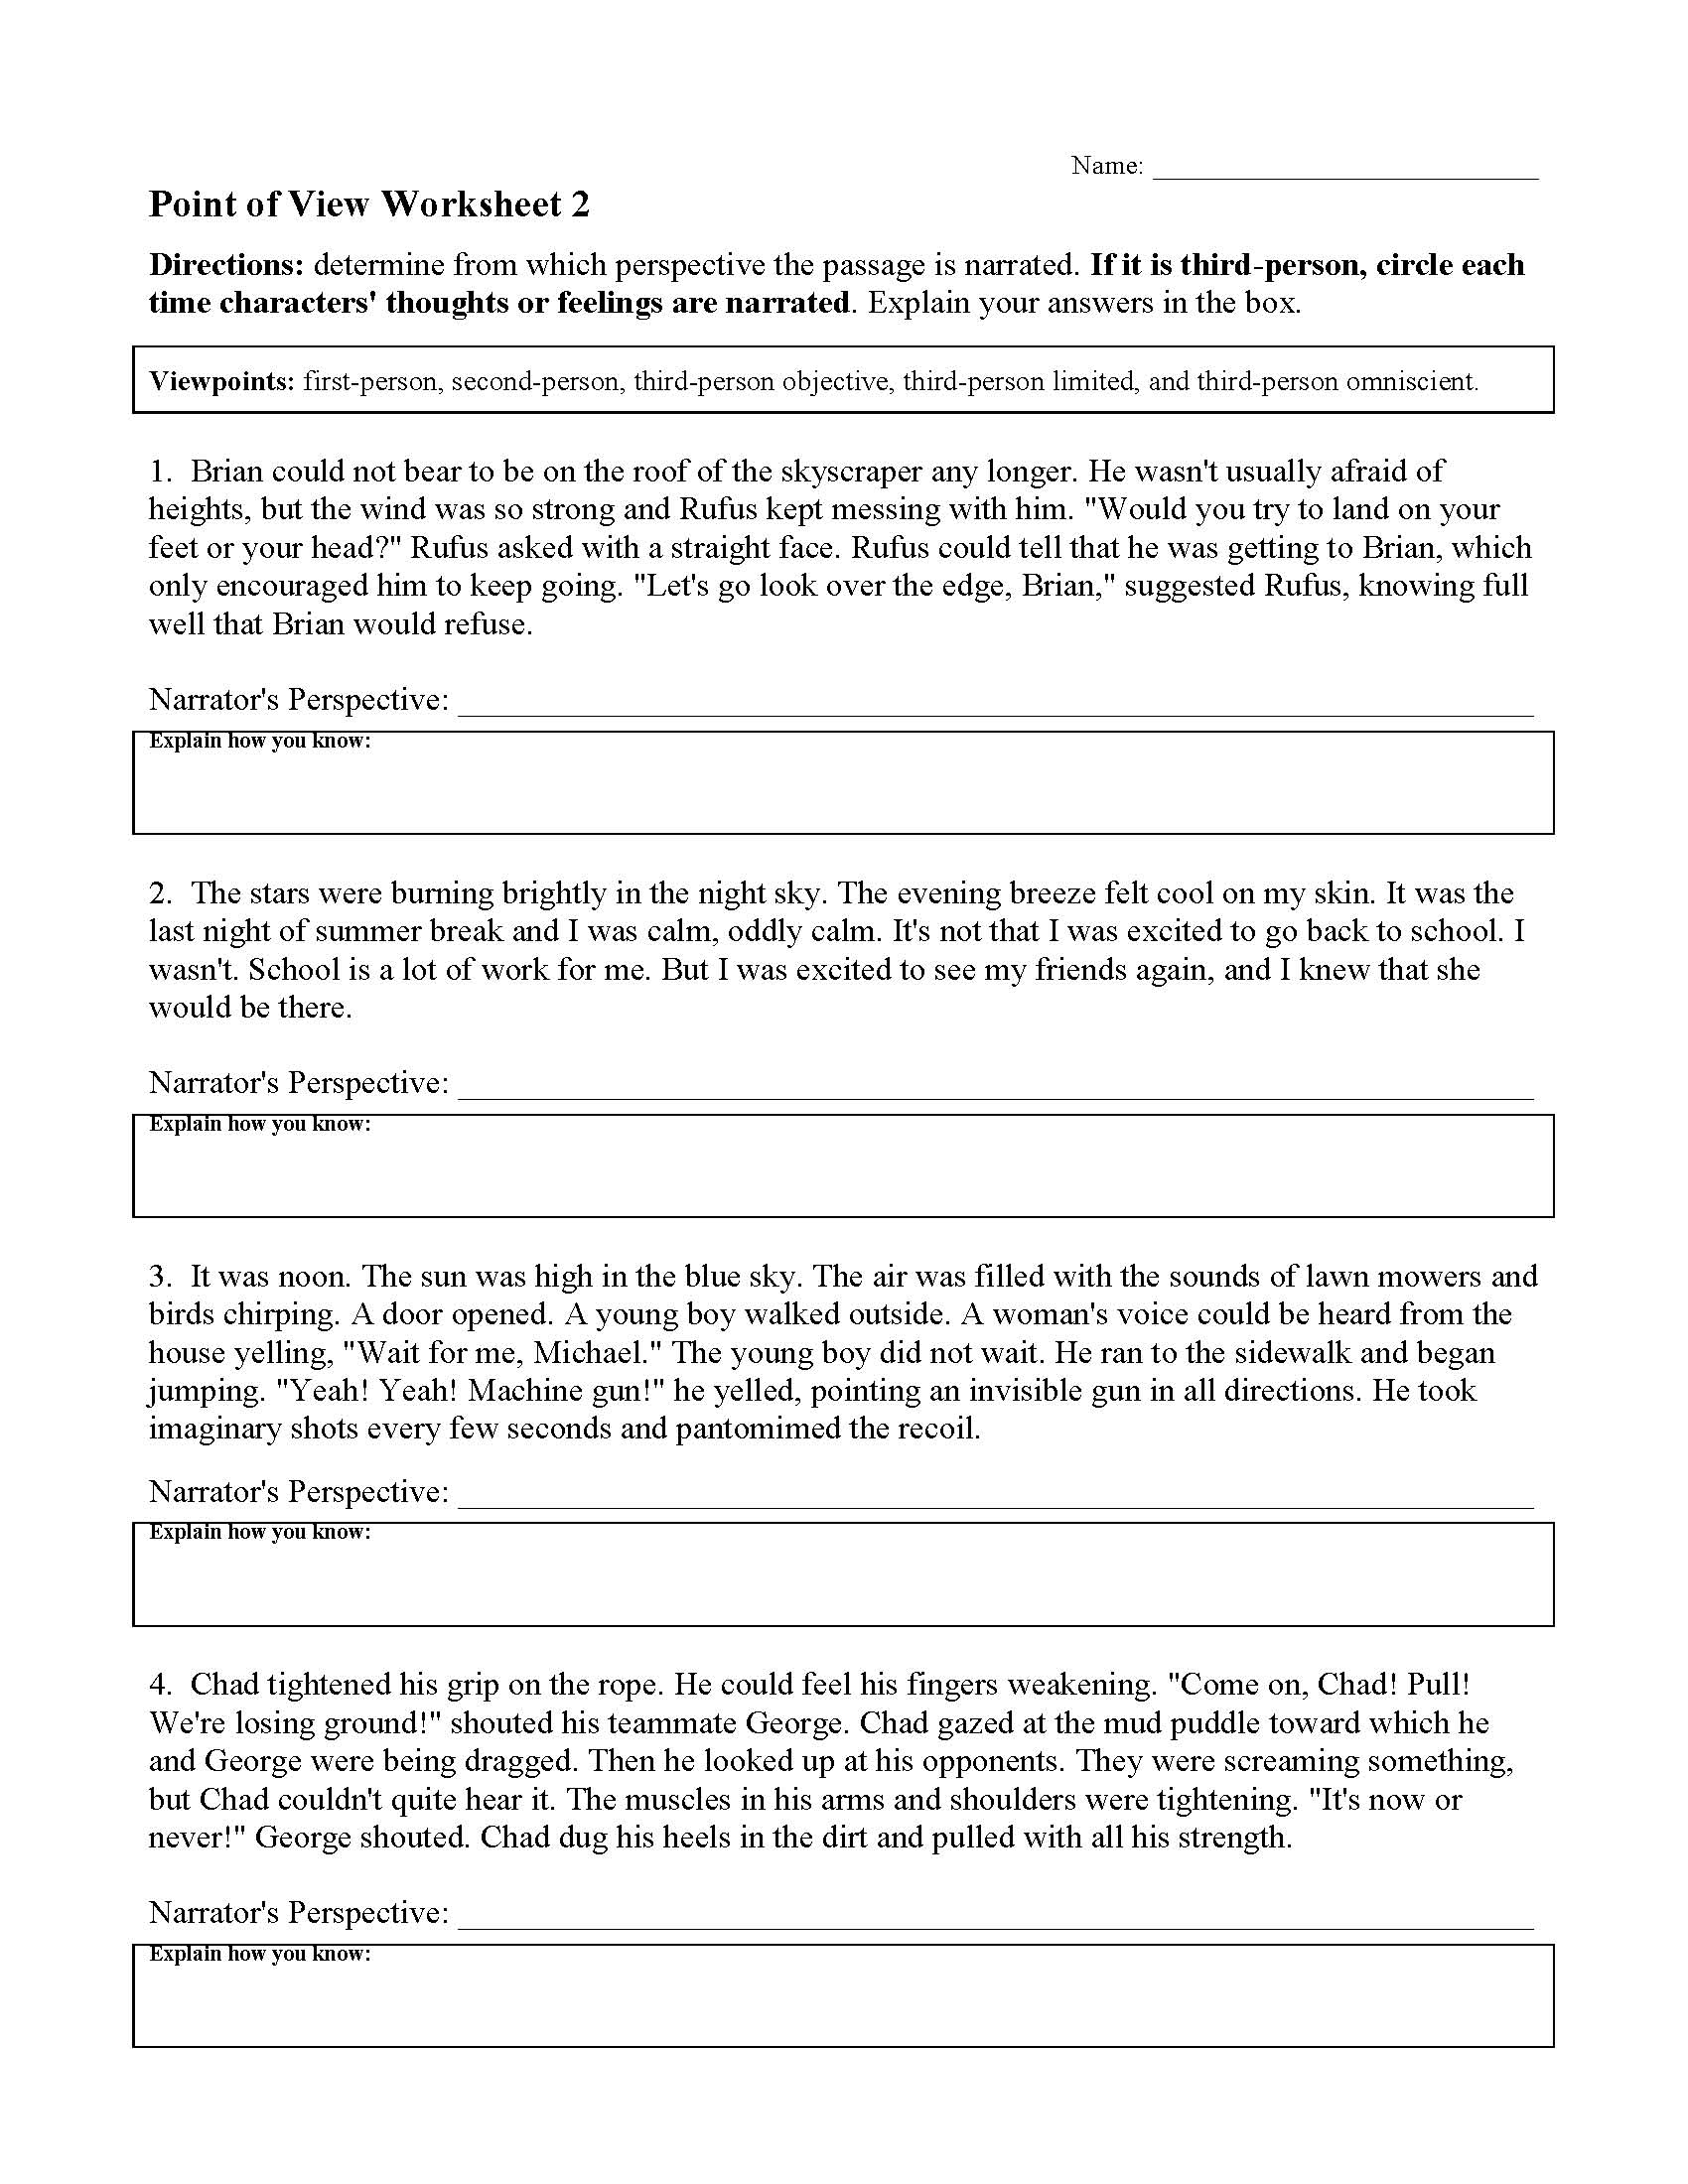 point-of-view-worksheet-2-preview